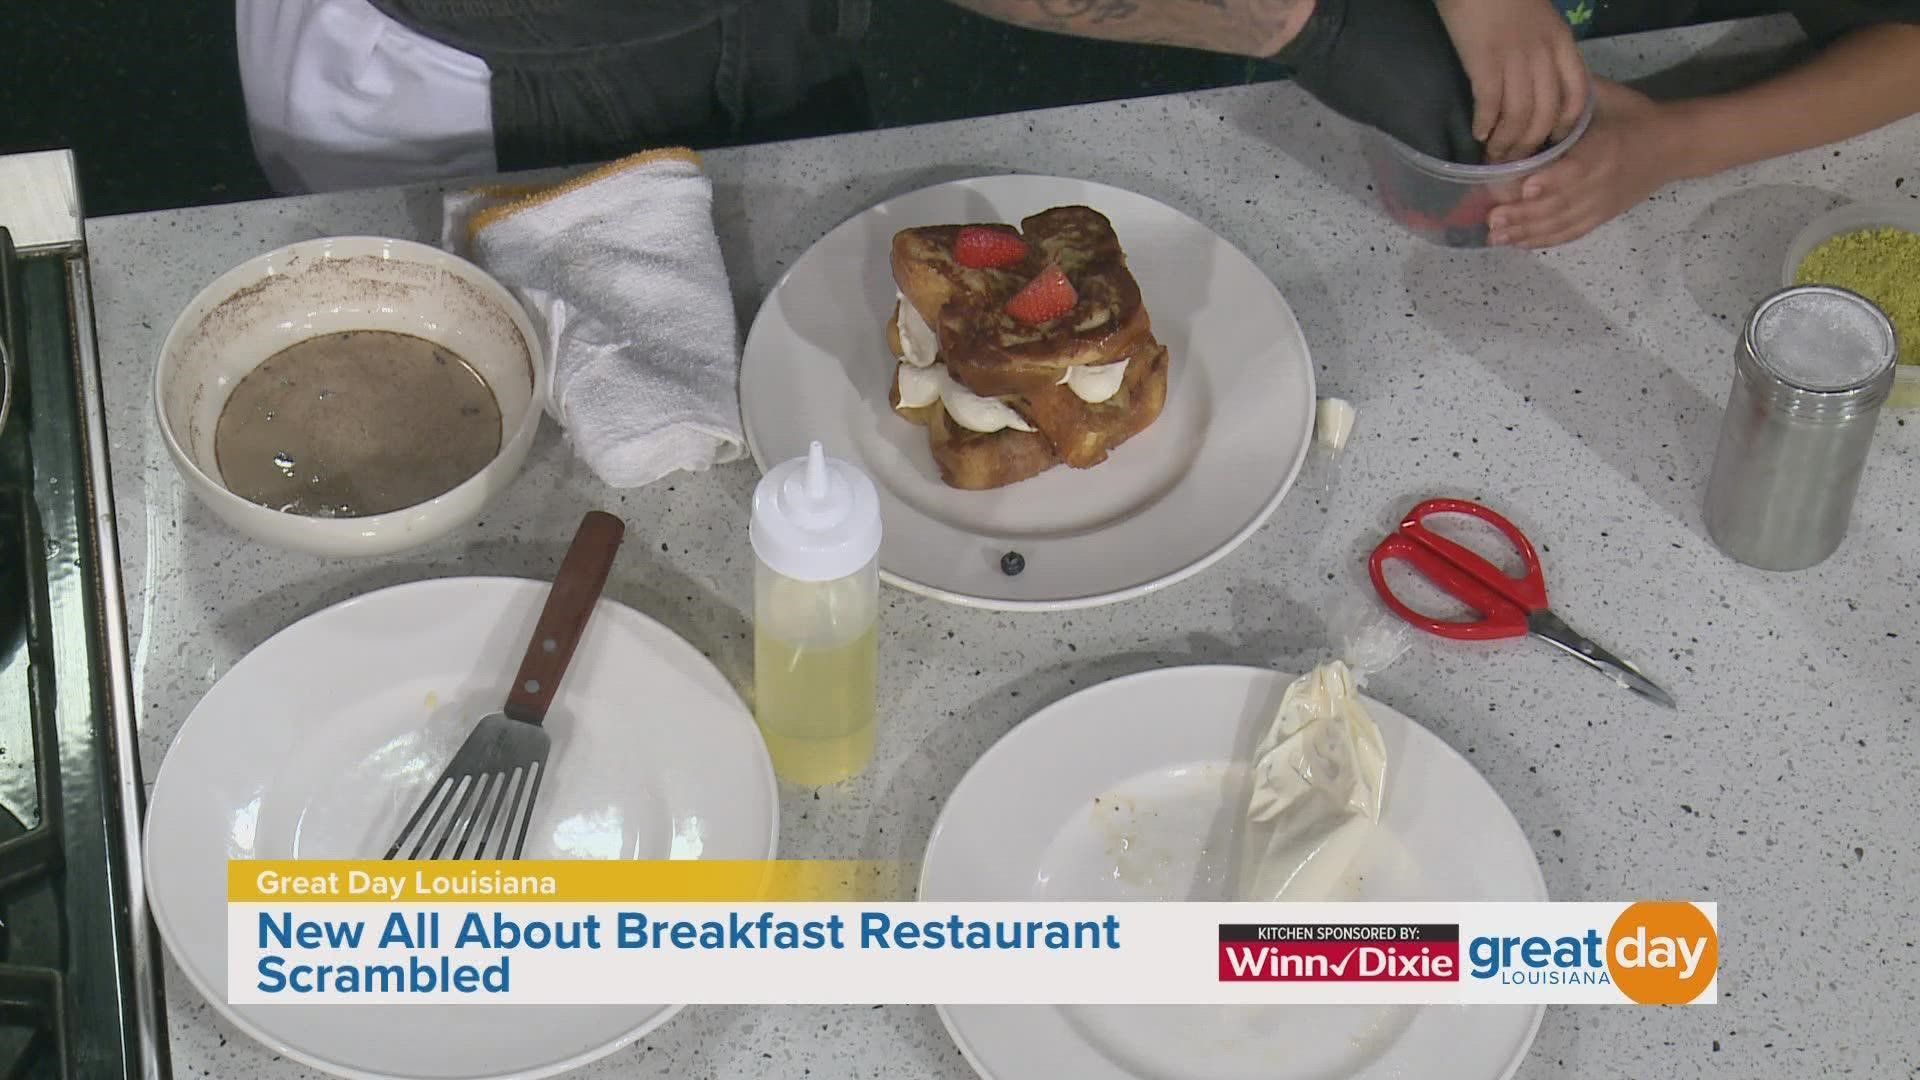 Chef Steven Green shows us how he brings his French toast up a notch at his new restaurant Scrambled.